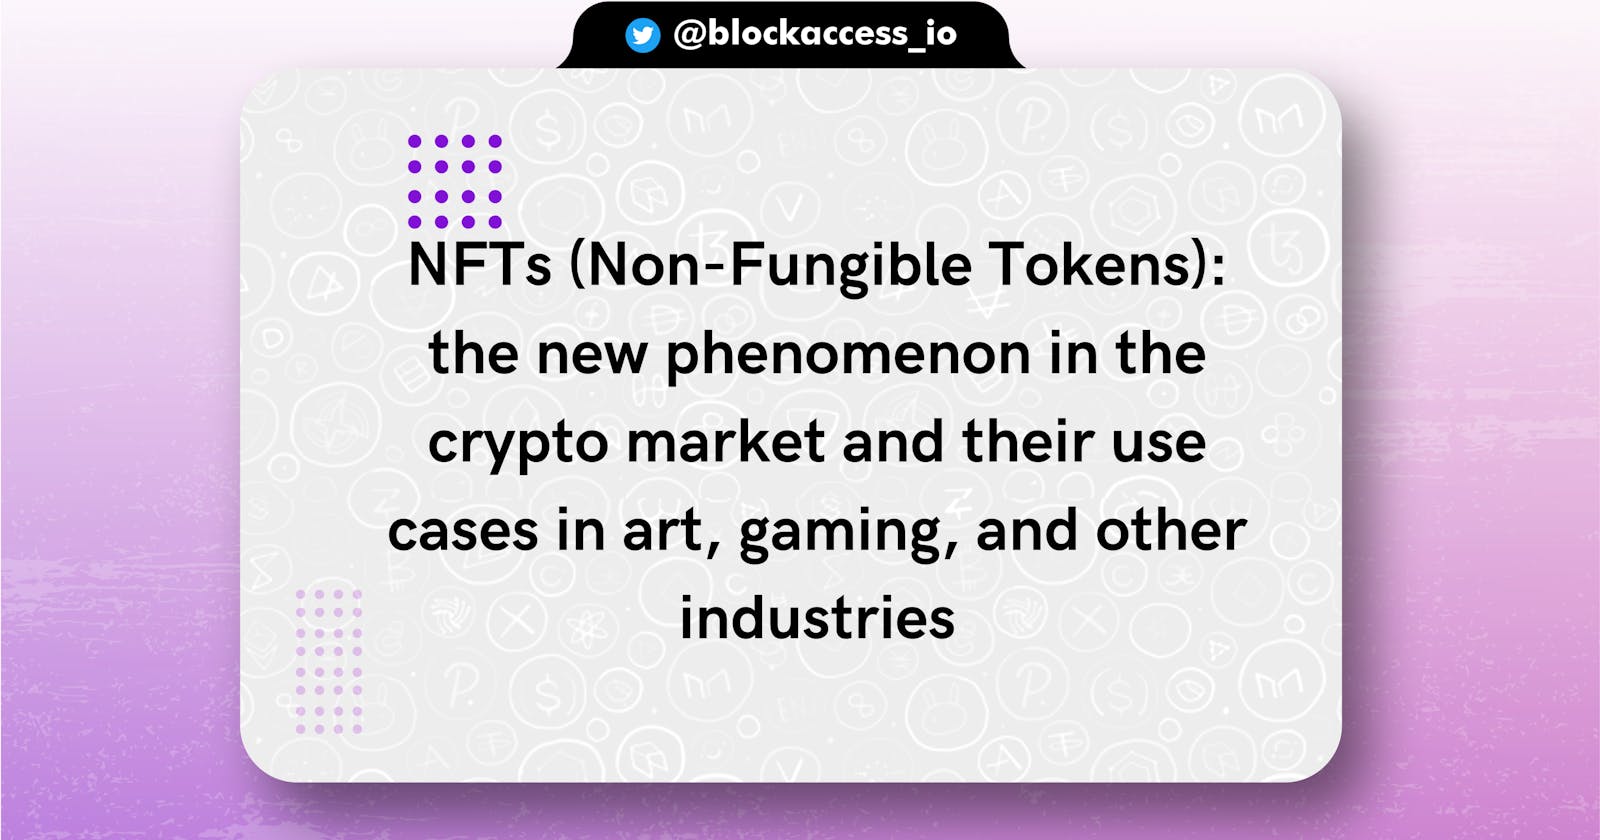 NFTs (Non-Fungible Tokens): the new phenomenon in the crypto market and their use cases in art, gaming, and other industries